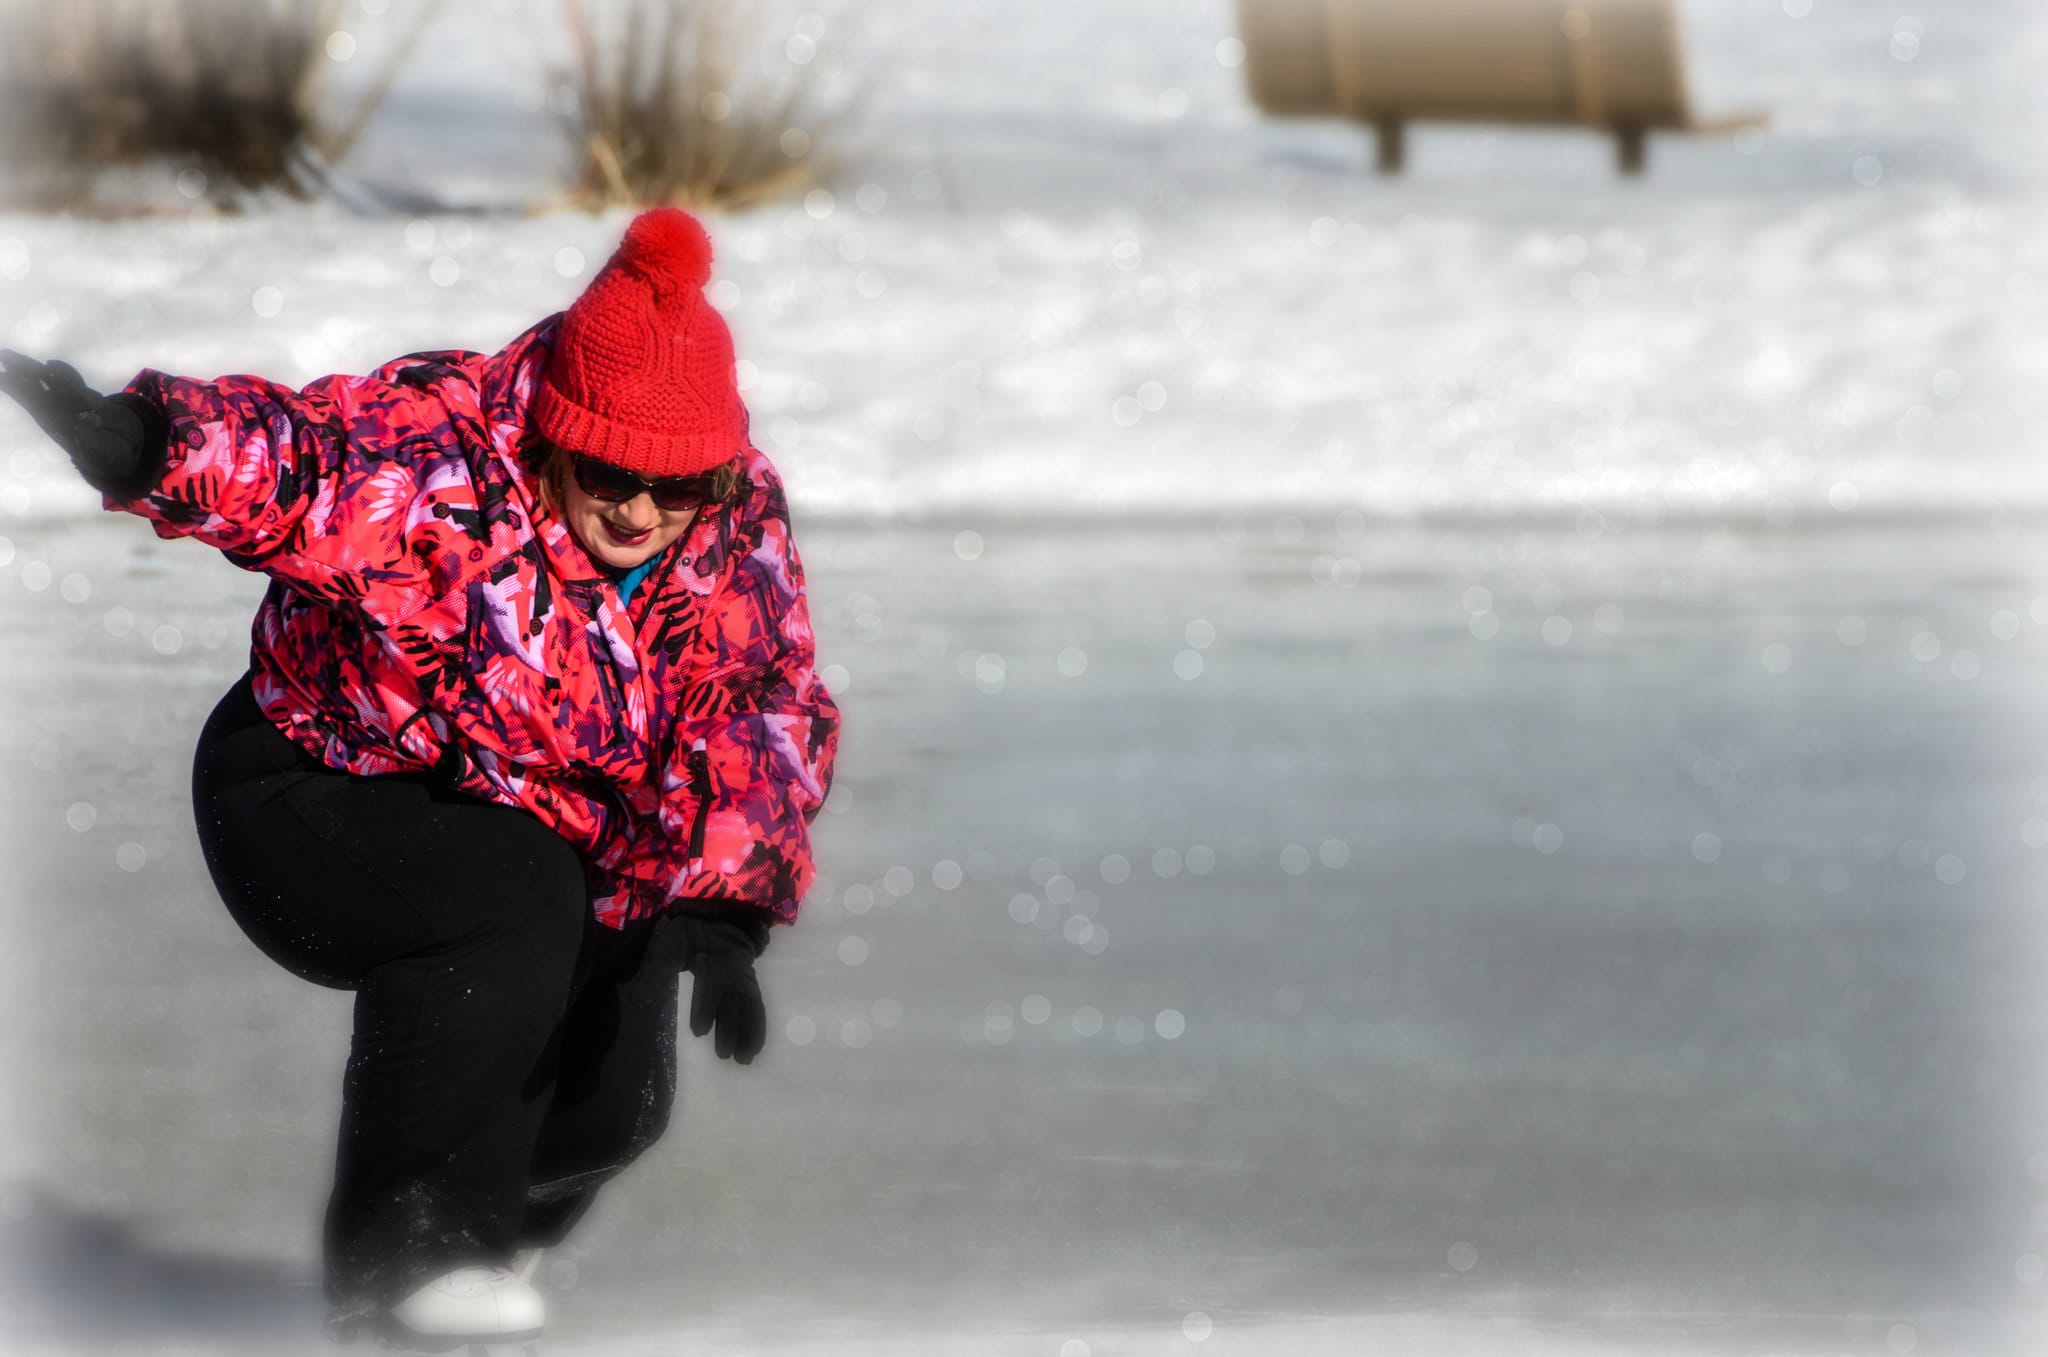 A woman in a vibrant pink jacket and red beanie skates gracefully on an outdoor ice rink, her posture focused and dynamic.